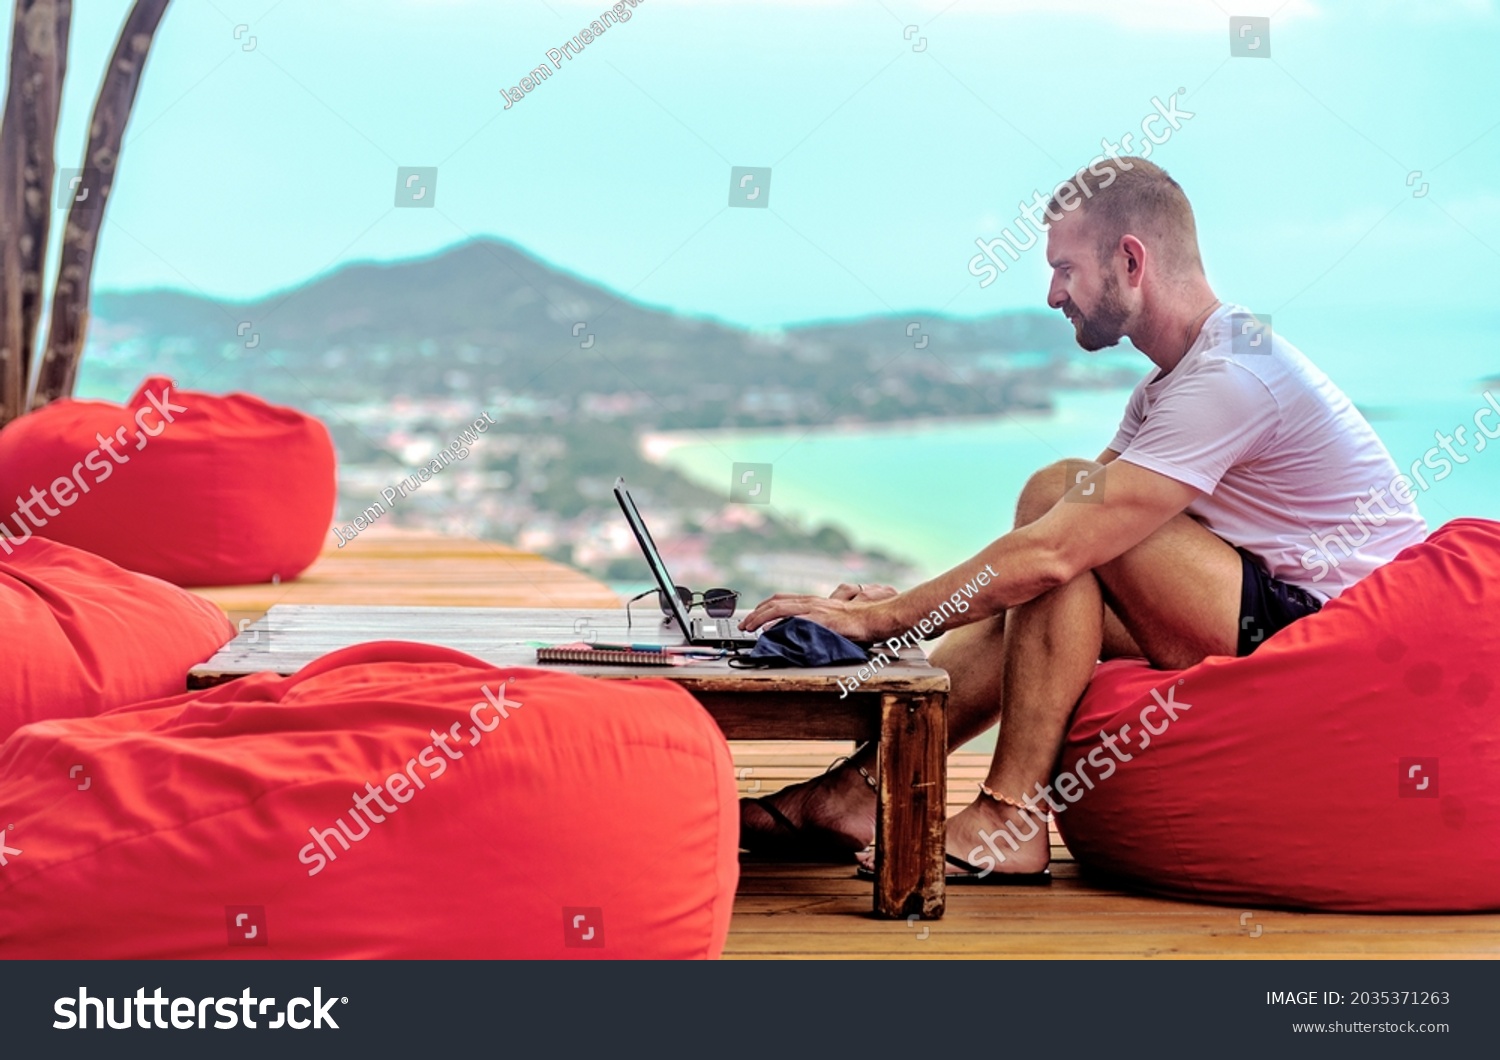 A Caucasian man sitting on a red cushion working remotely with his laptop. There are mountains and the sea in the background #2035371263